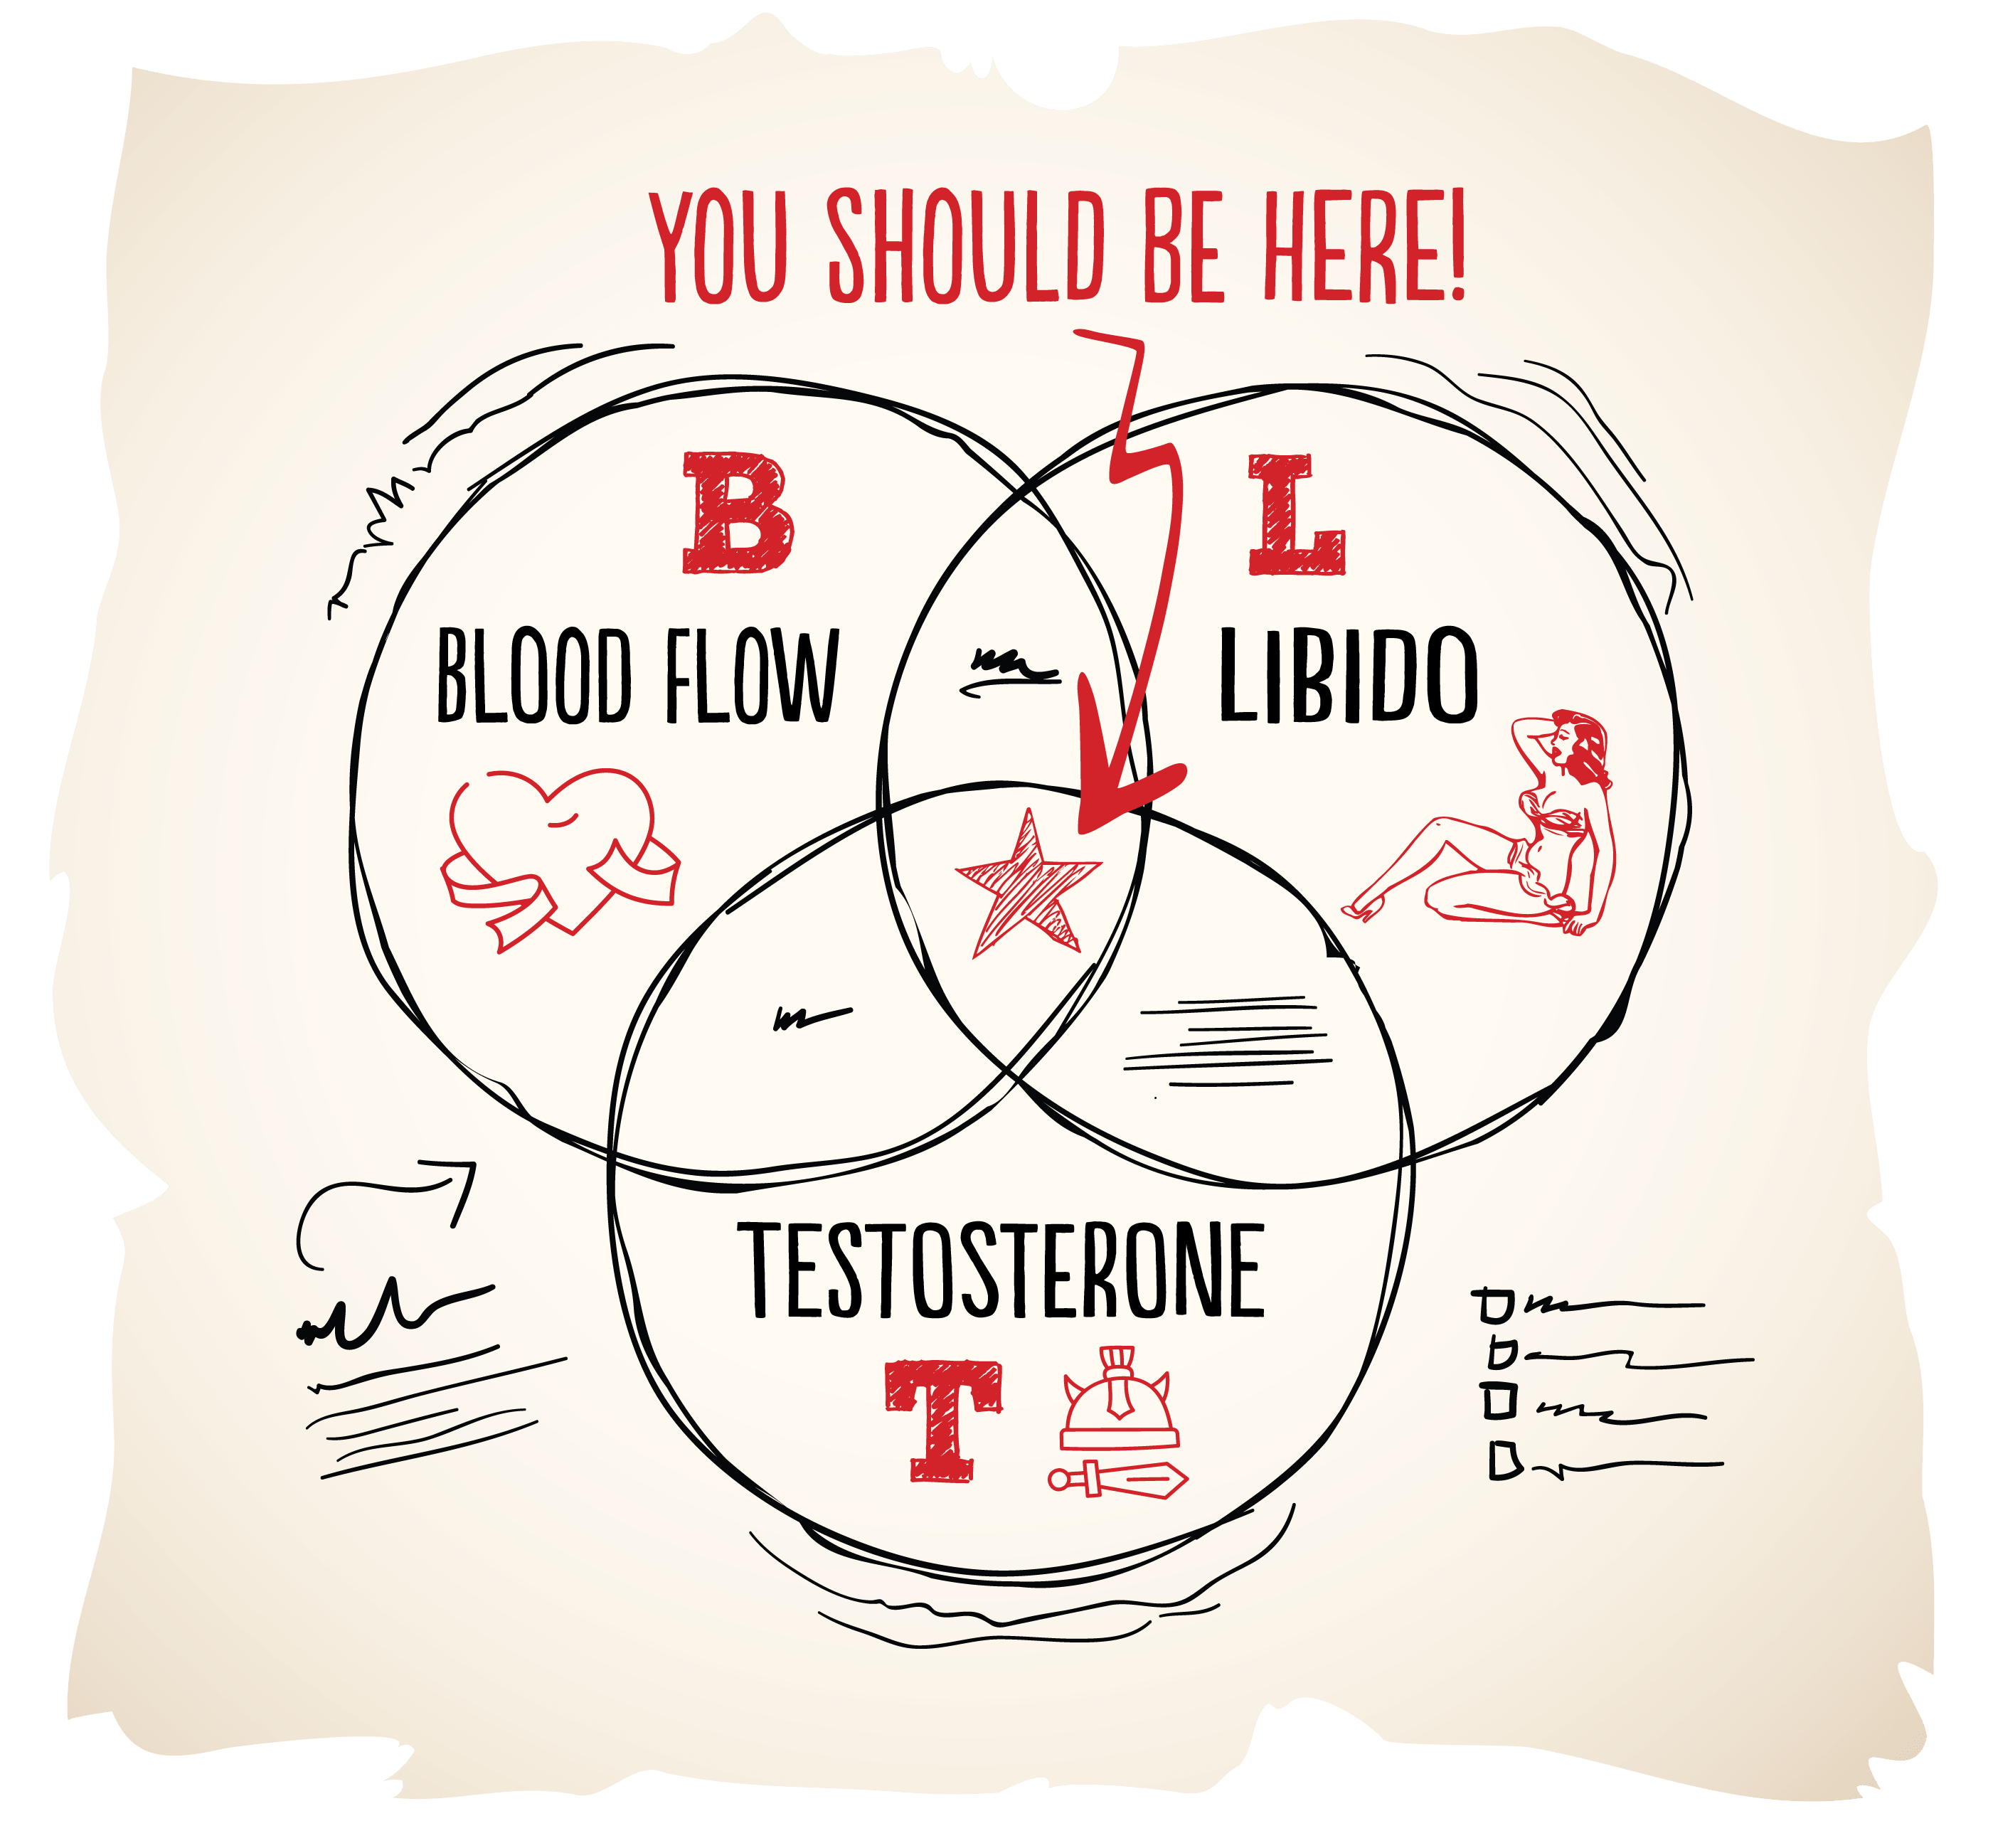 Bloodflow - Libido - Testosterone circle diagram.  Star in the middle. You should be here.